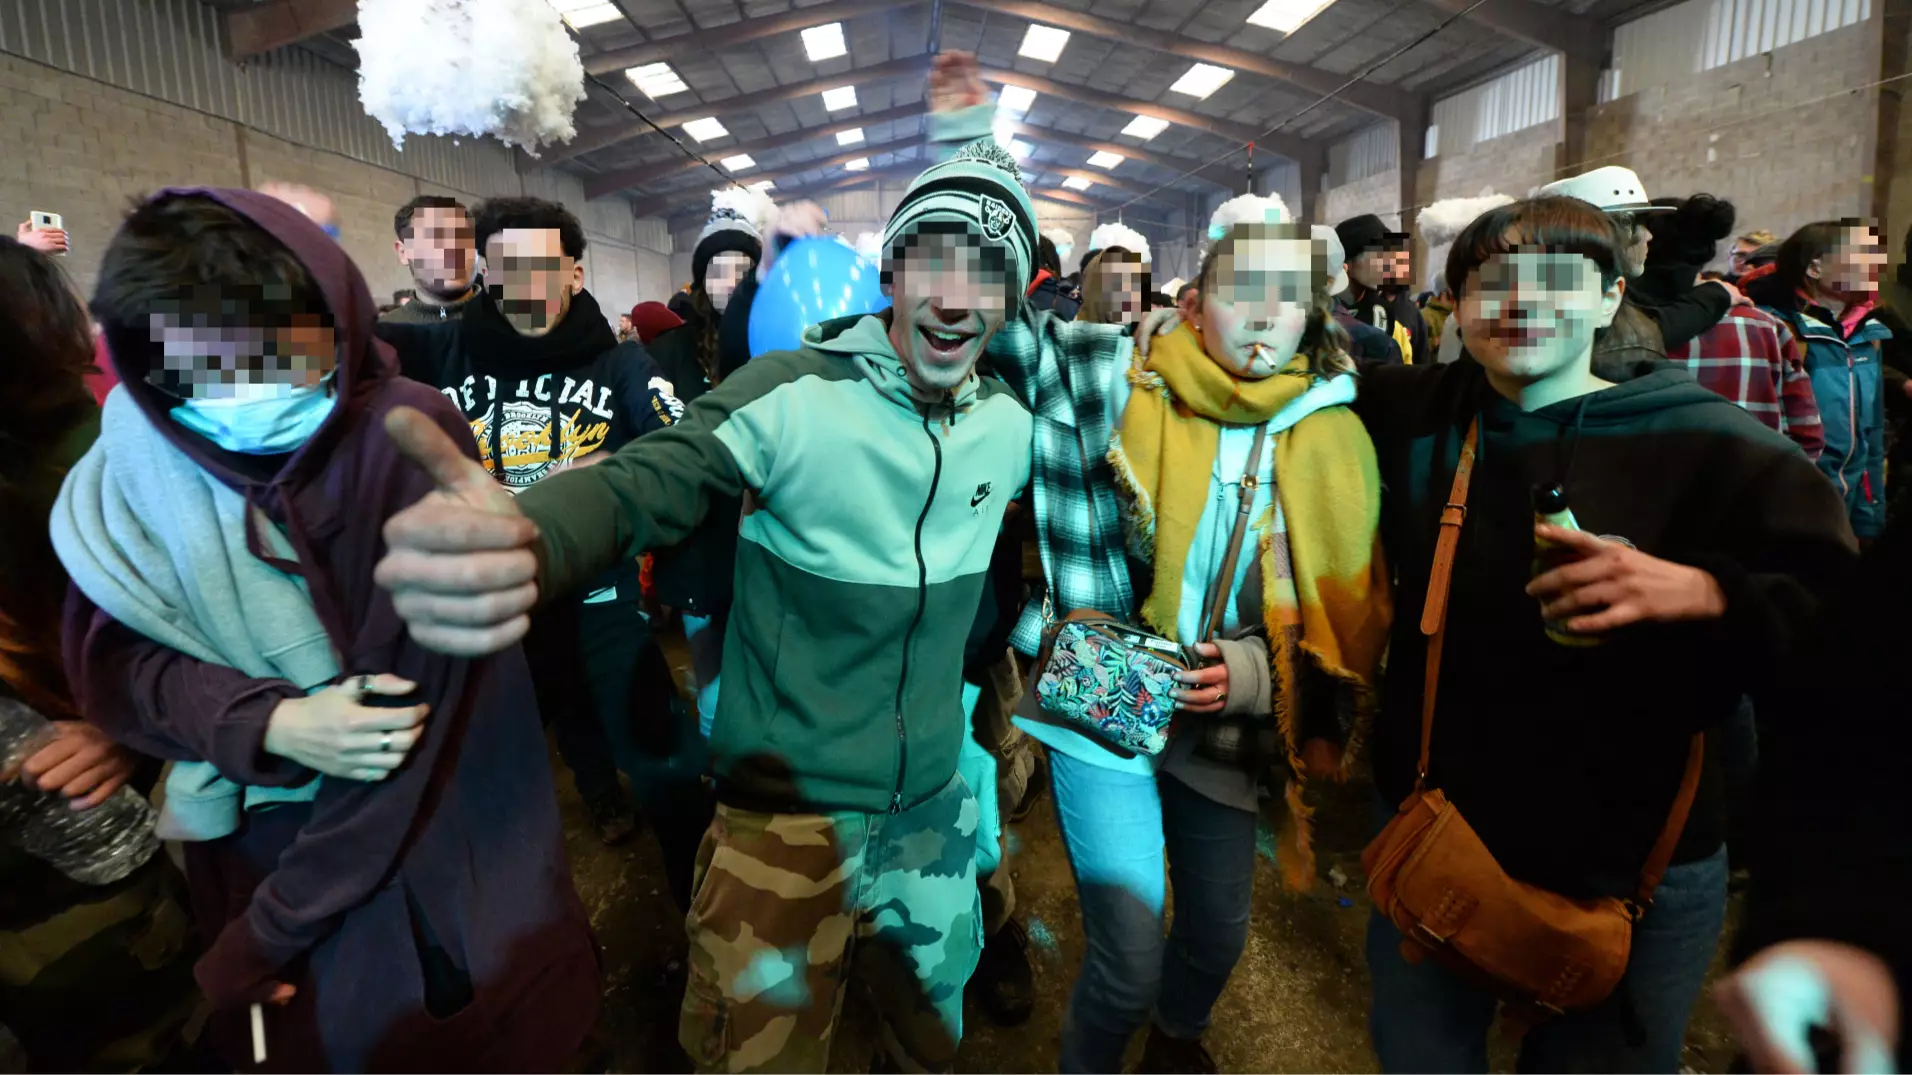 Police Shut Down Illegal Three-Day Rave In France With More Than 2,500 Attendees